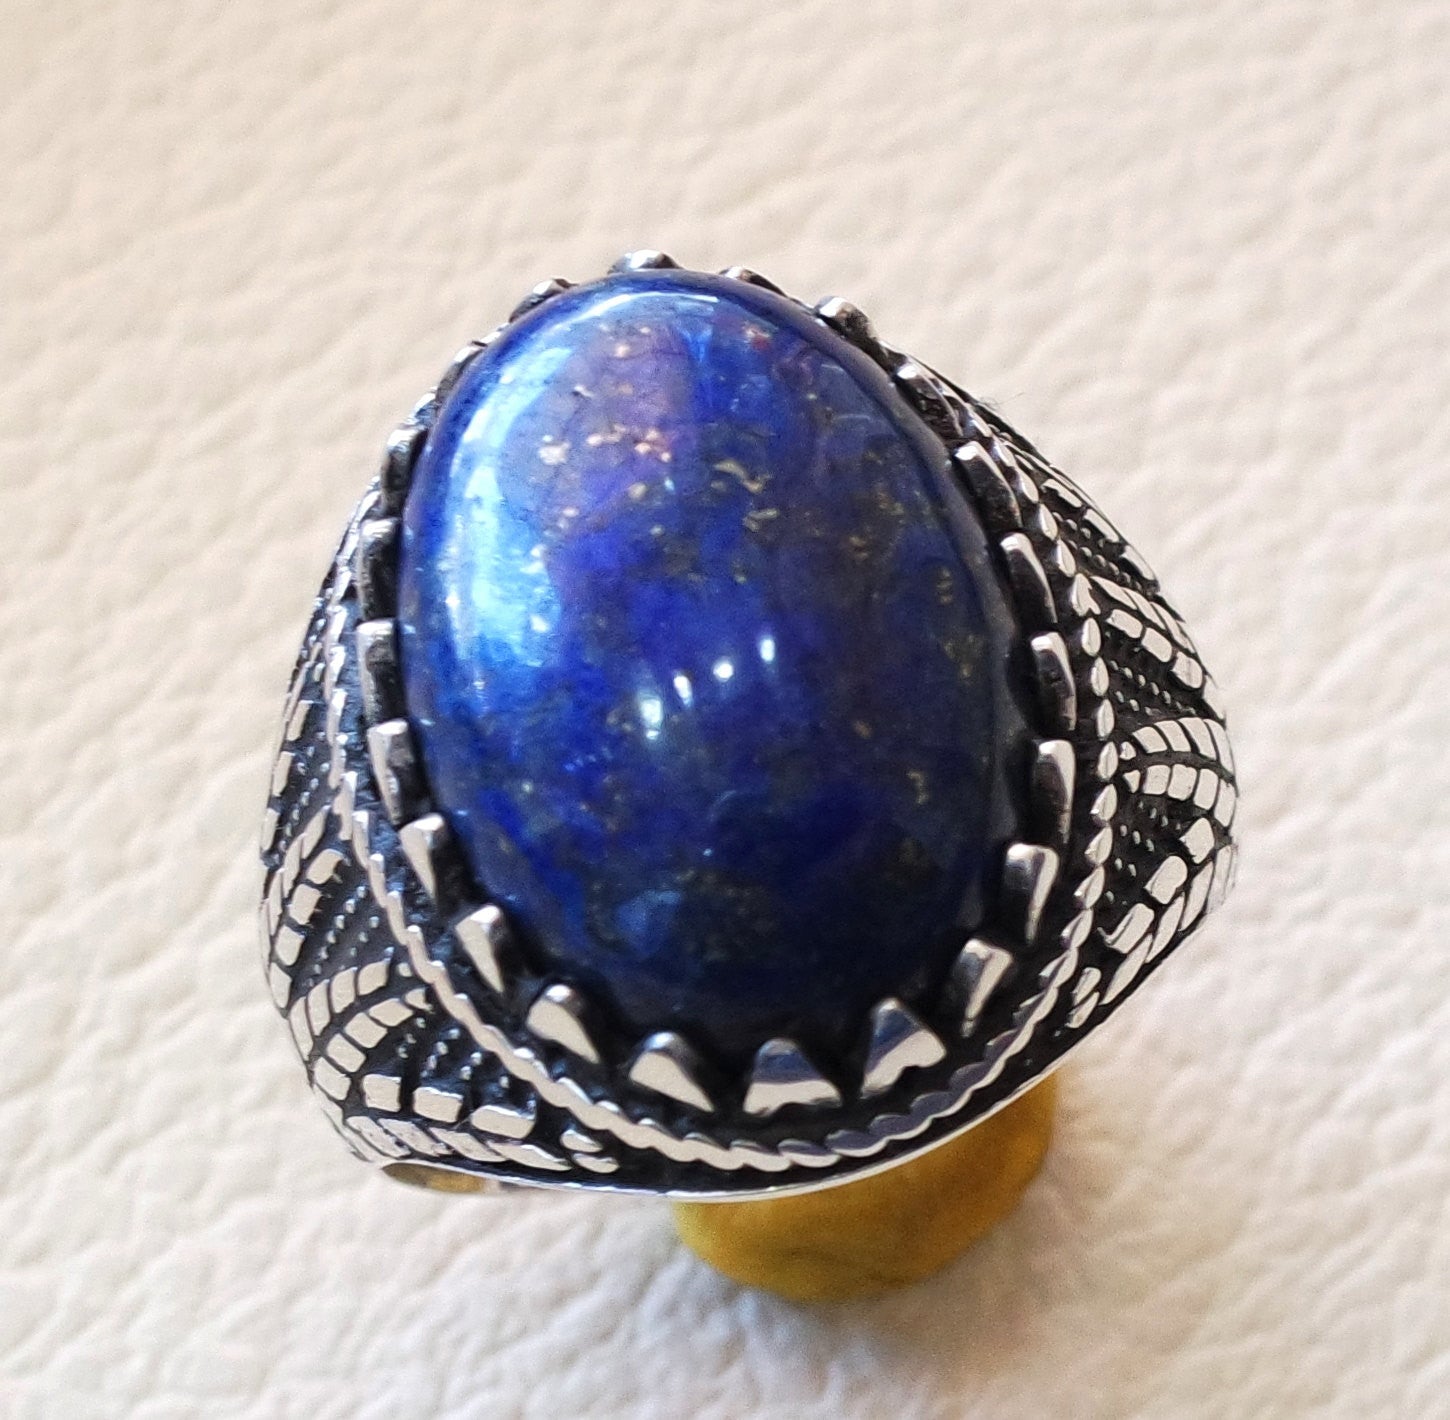 lapis lazuli oval cabochon natural dark blue stone man ring sterling silver 925 men jewelry all sizes 18 * 13 mm antique middle eastern